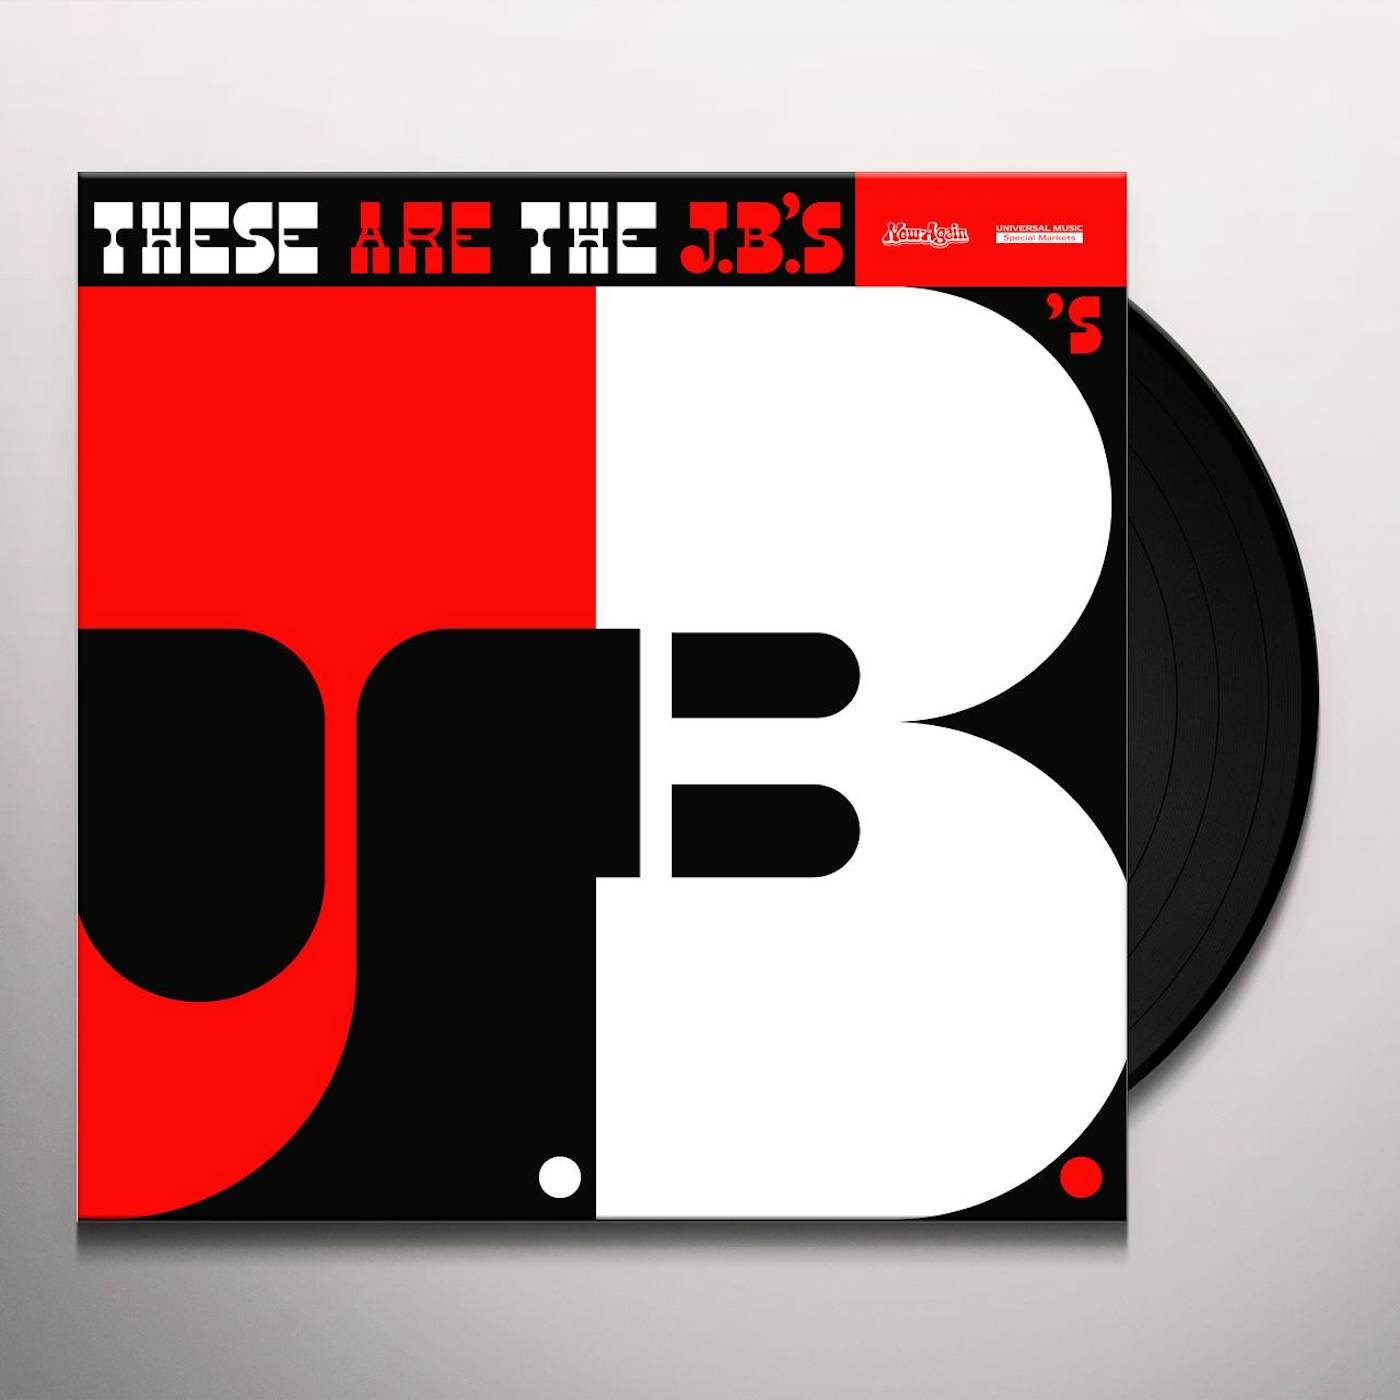 THESE ARE THE The J.B.'s Vinyl Record